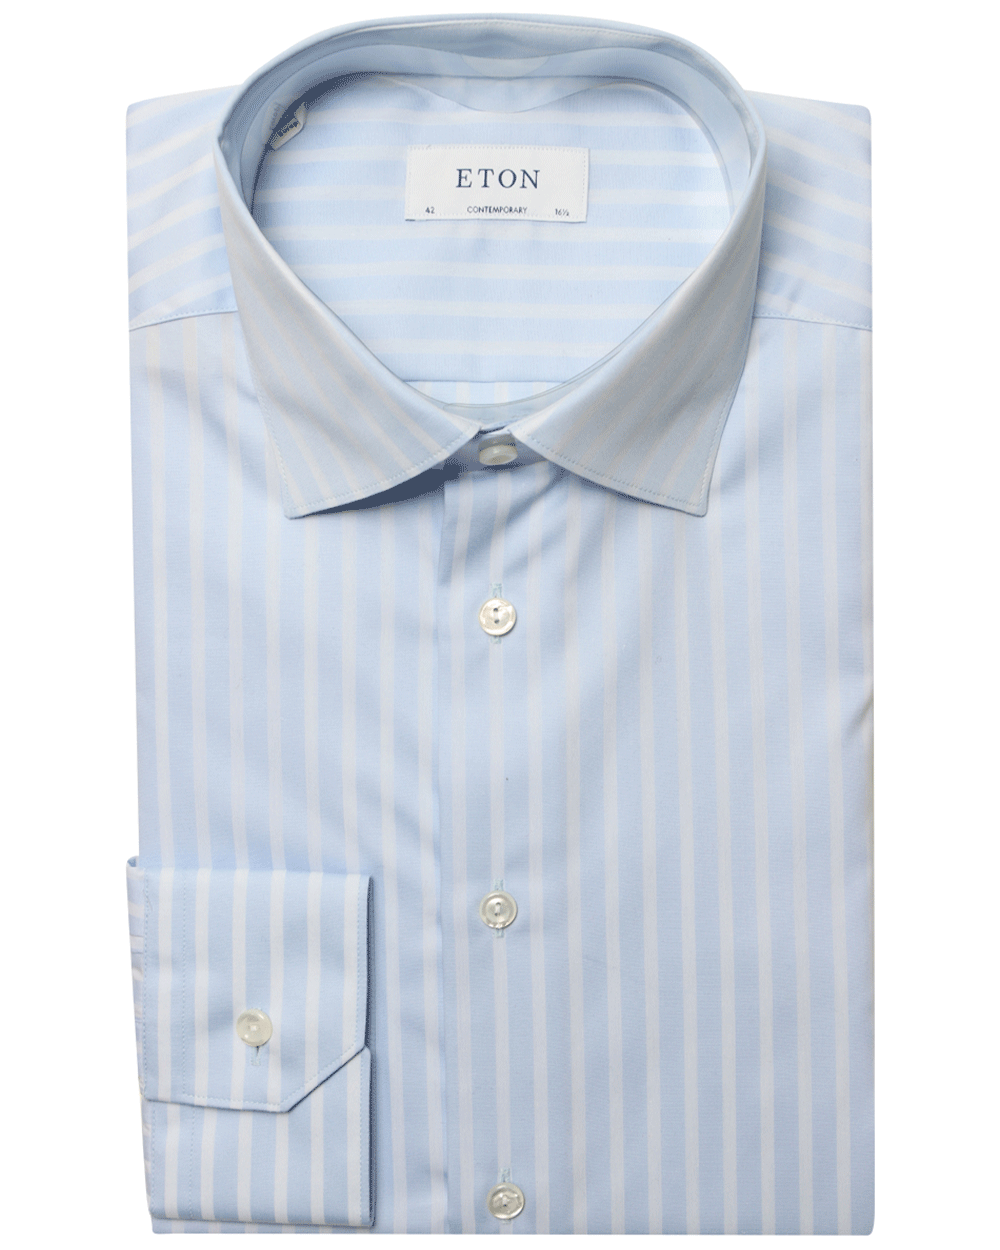 Mid Blue and White Striped Cotton Dress Shirt